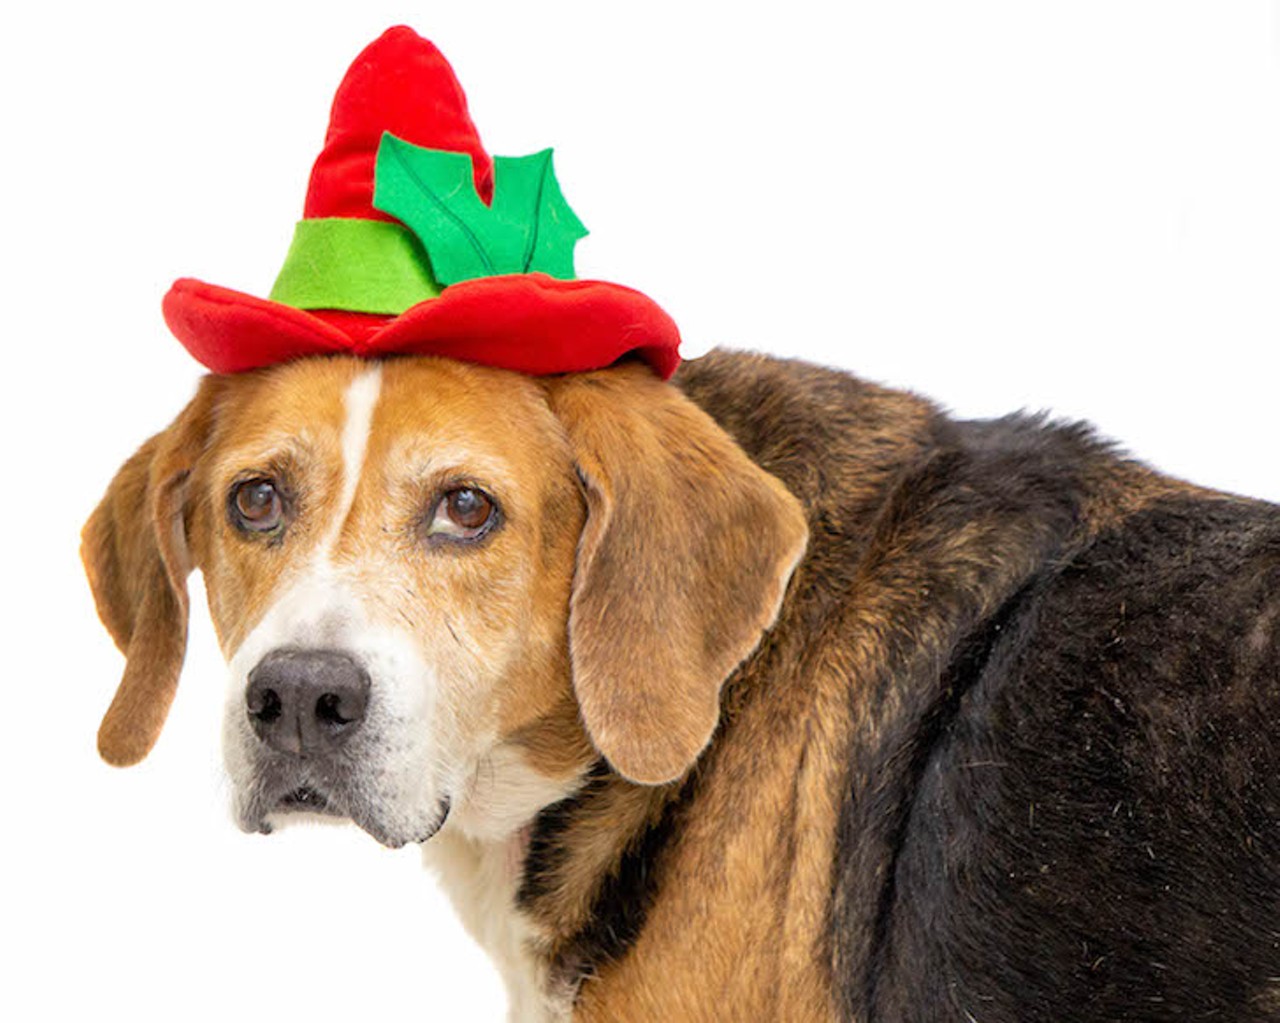 These adoptable little Santa's helpers in Orange County need homes for the holidays